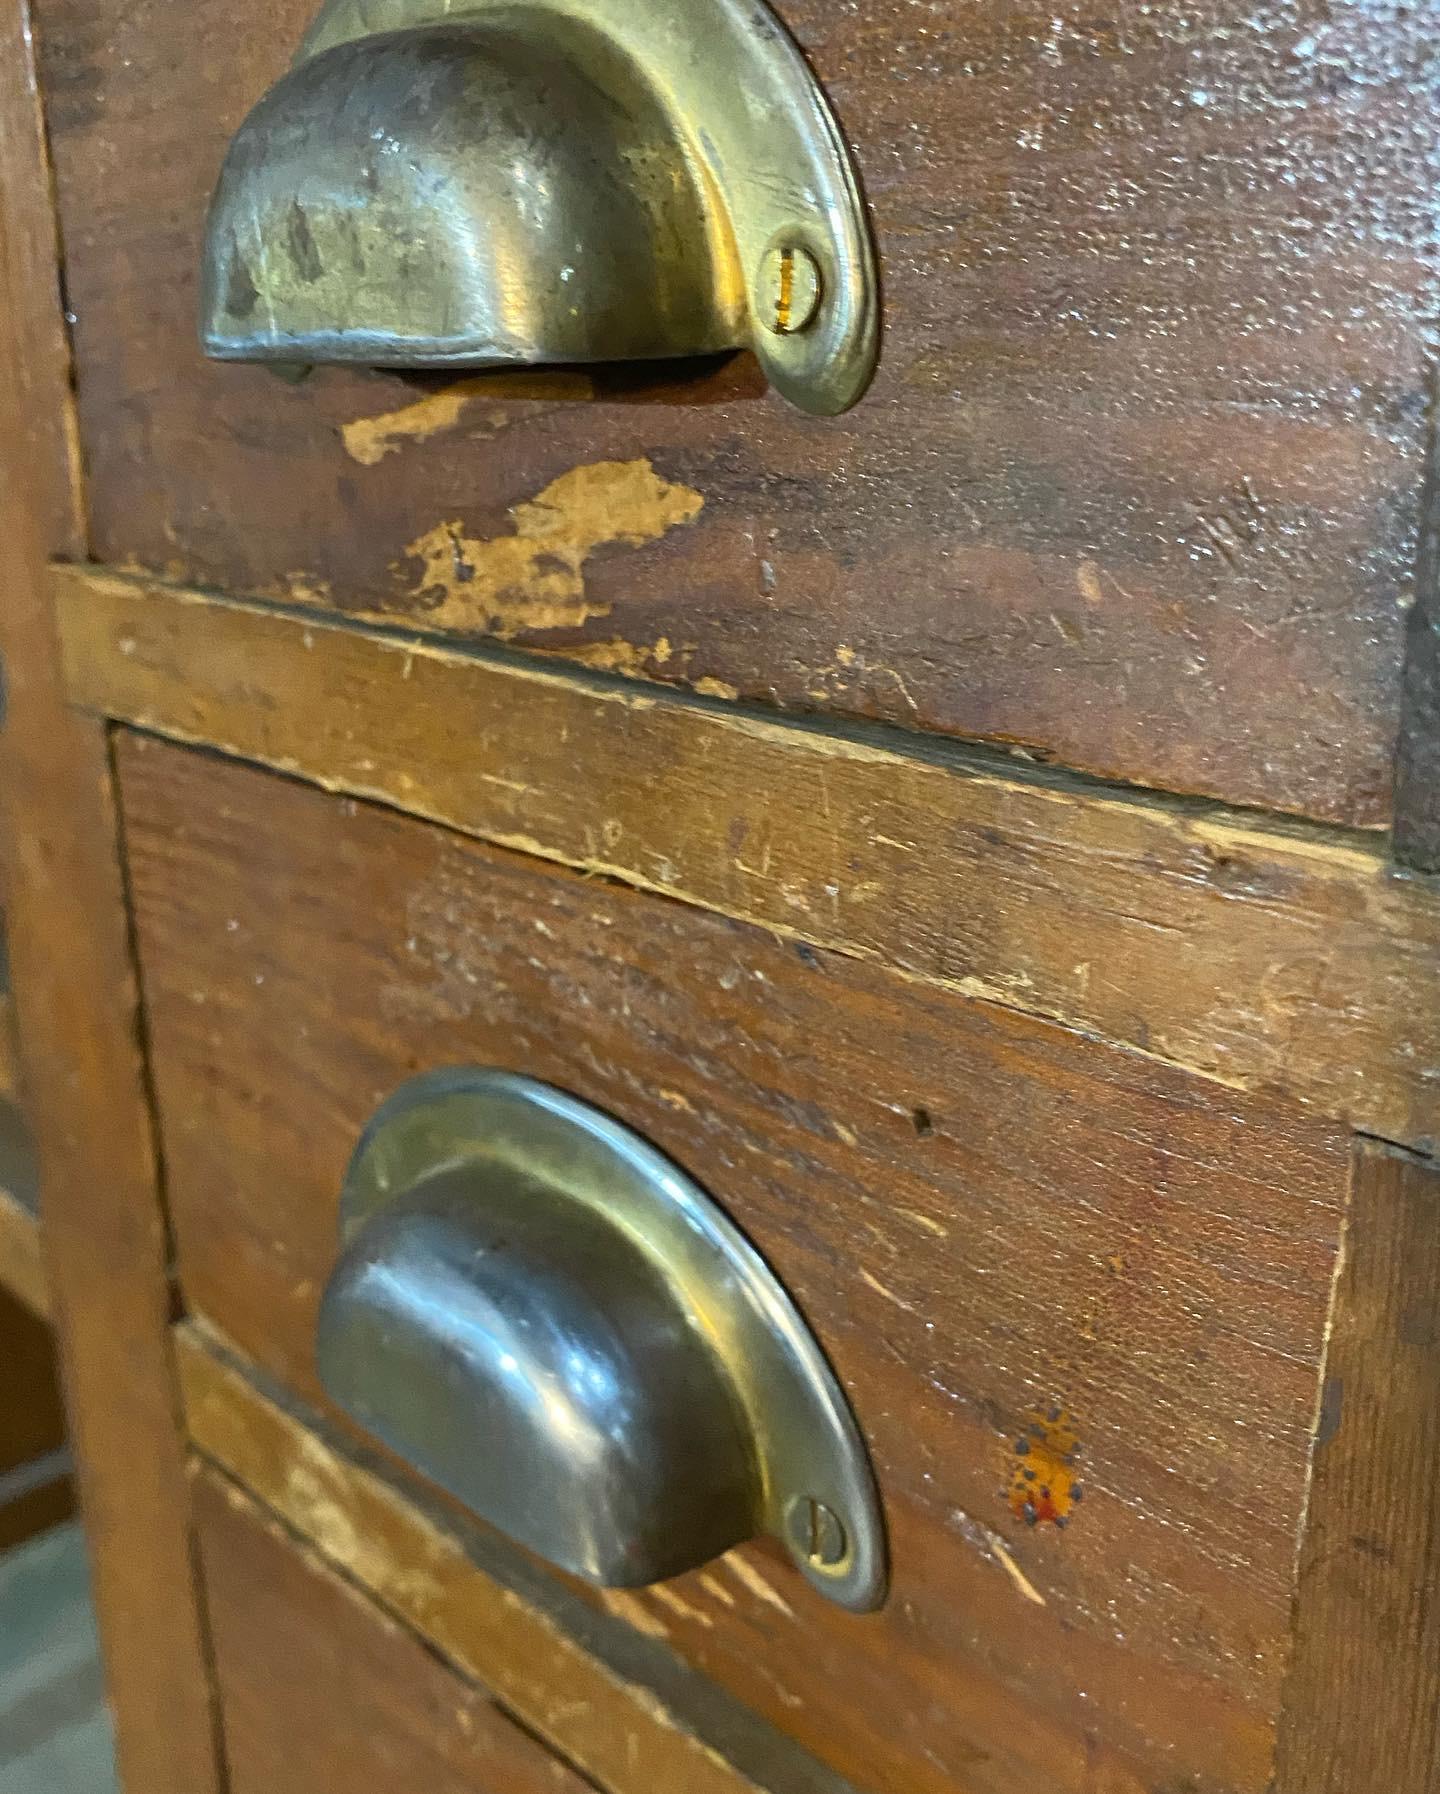 A very original. Watchmakers desk from the Birks Jewellery Co, this cabinet was used by repair workers in the trade.

A nice authentic piece.